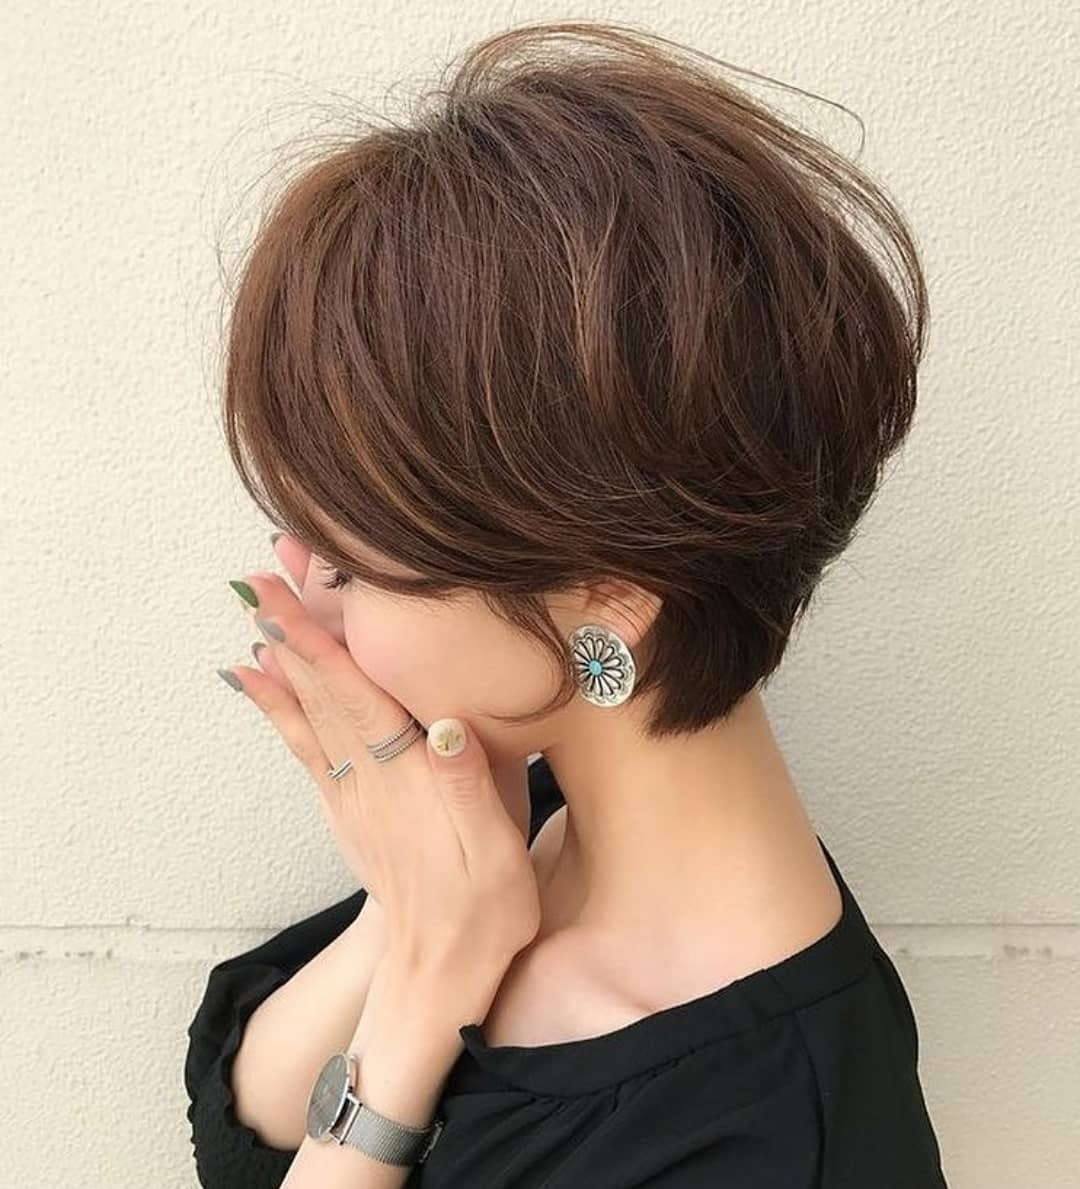 Short Cute Haircuts
 10 Cute Short Hairstyles and Haircuts for Young Girls